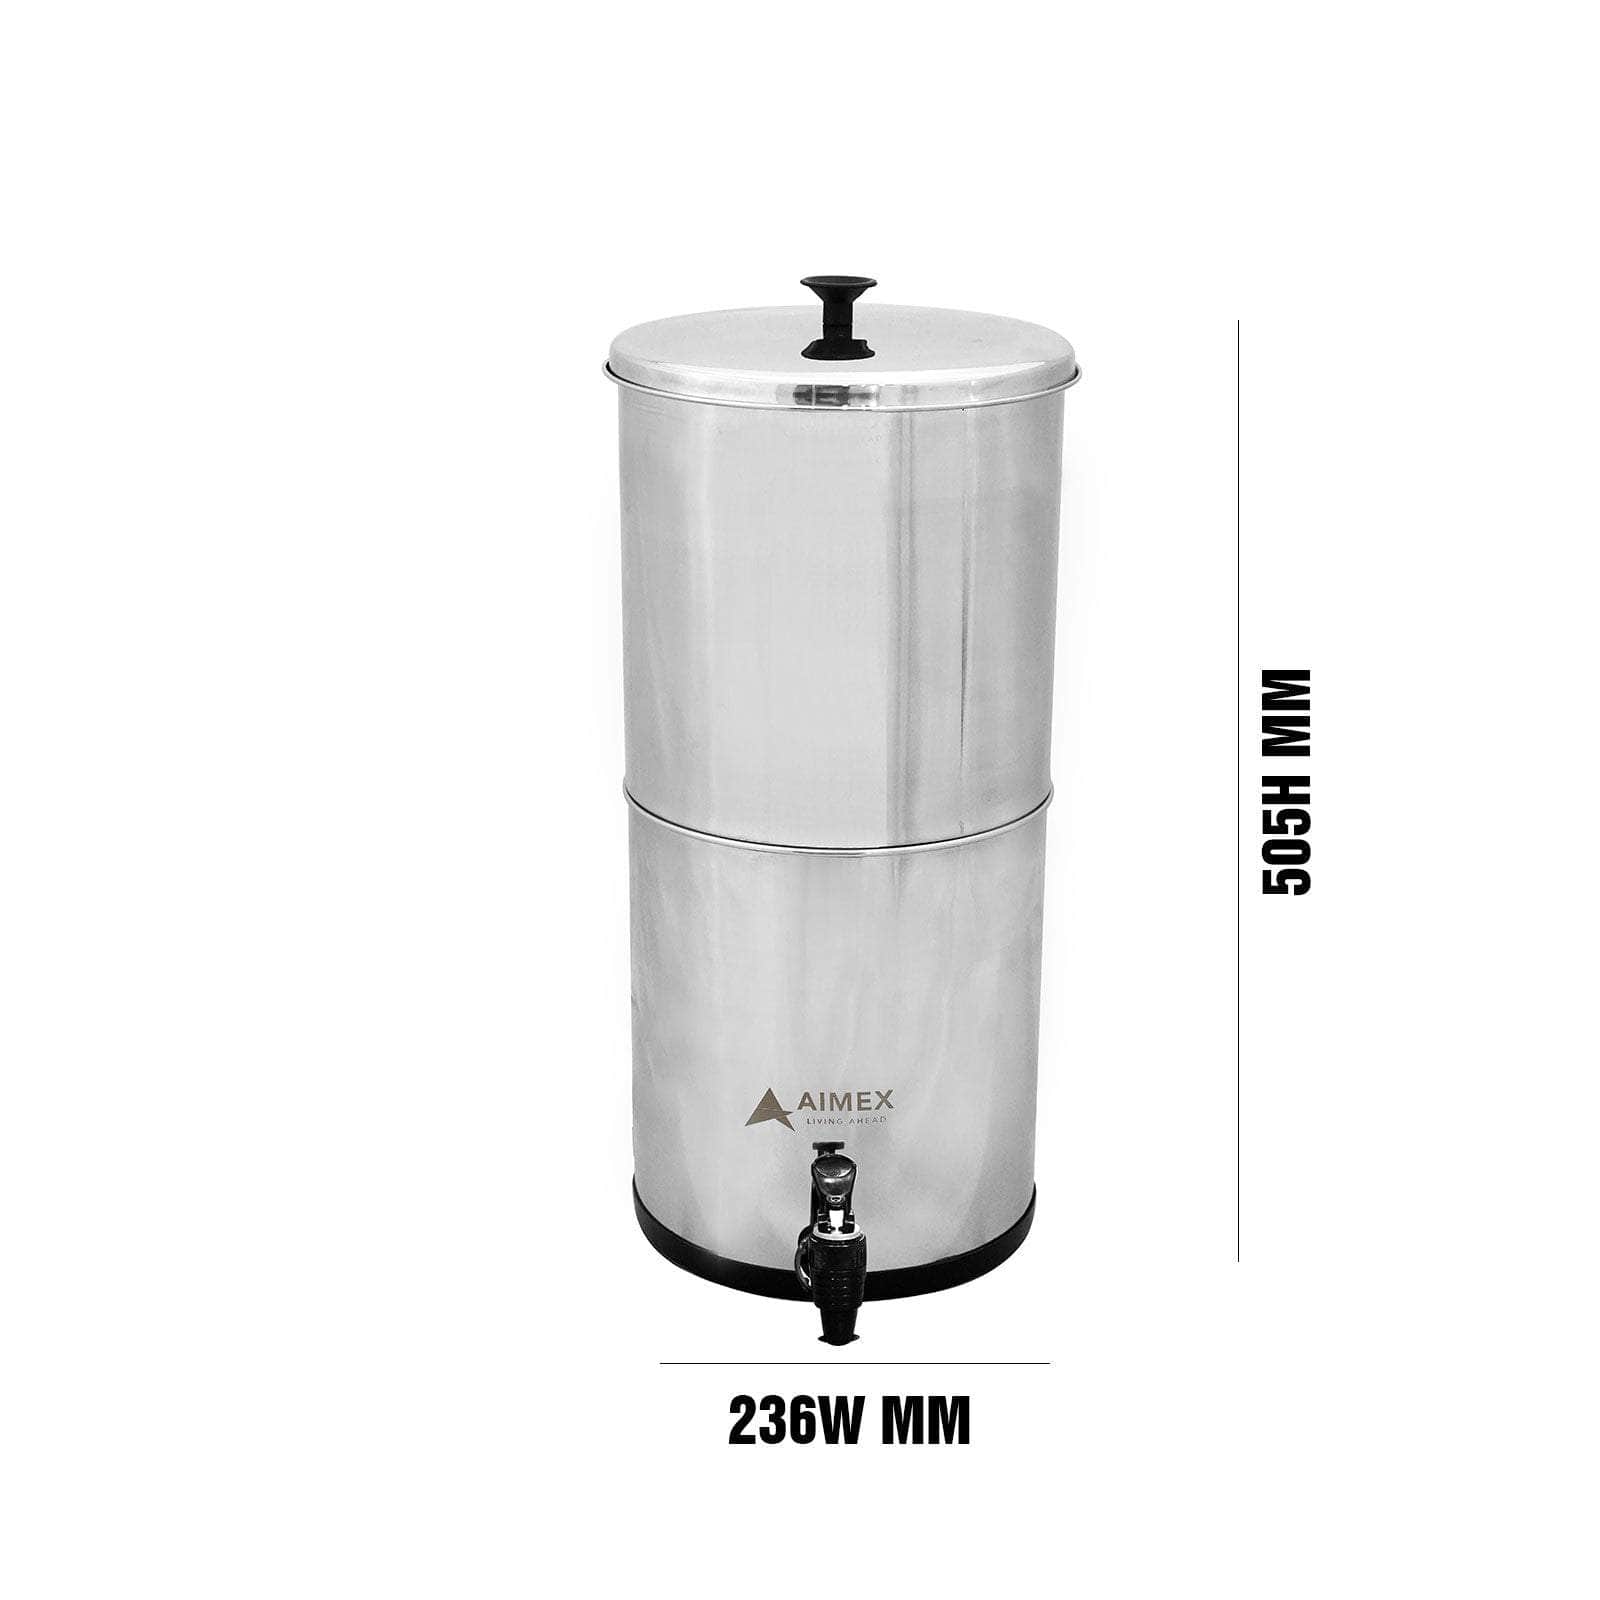 Water Stainless Steel 304 Water Filter System - White Filter